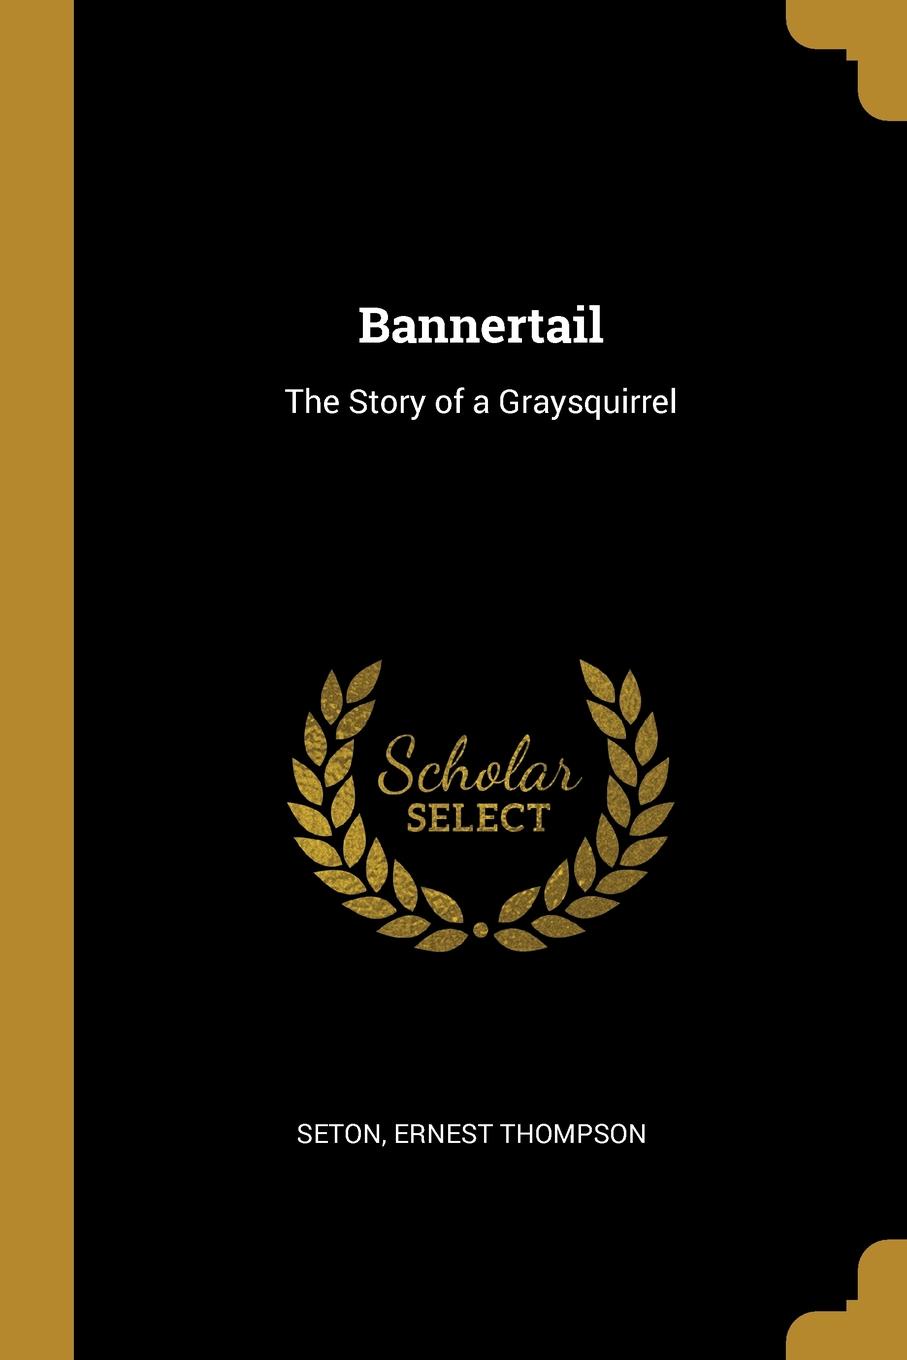 Bannertail. The Story of a Graysquirrel